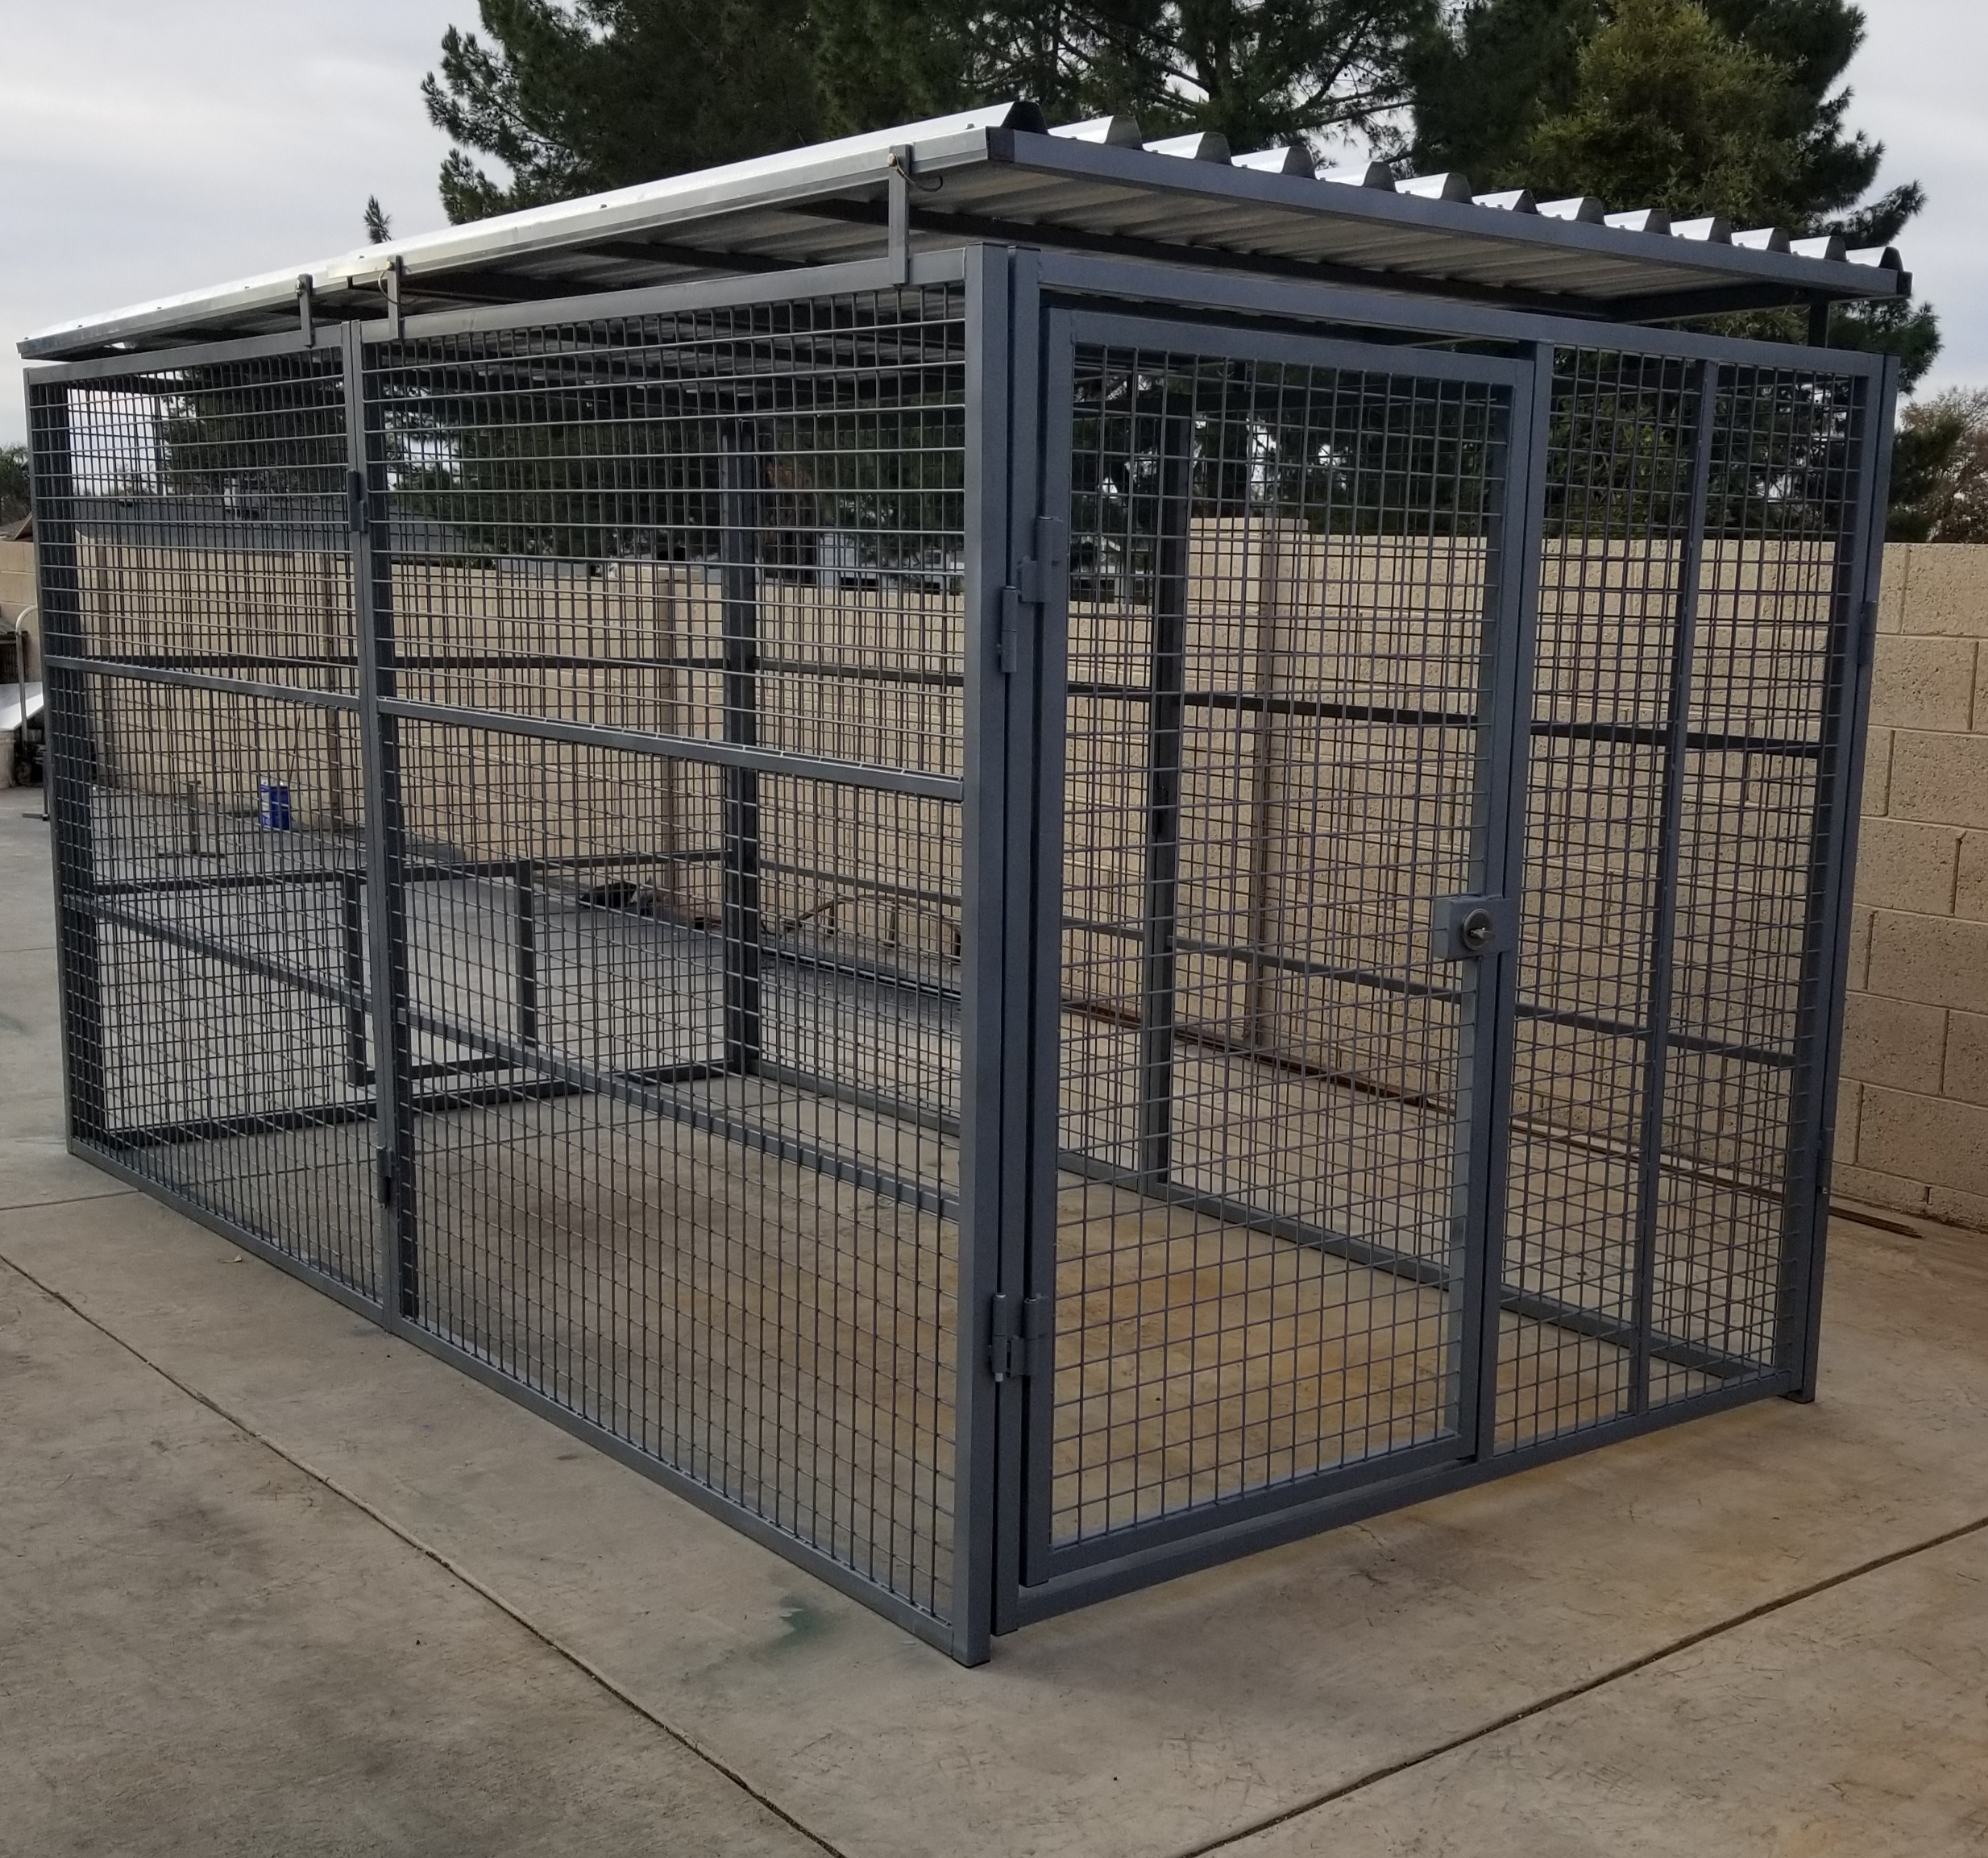 6 X 12 Outside dog kennel from Carrymydog.com by Xtreme Dog Crates